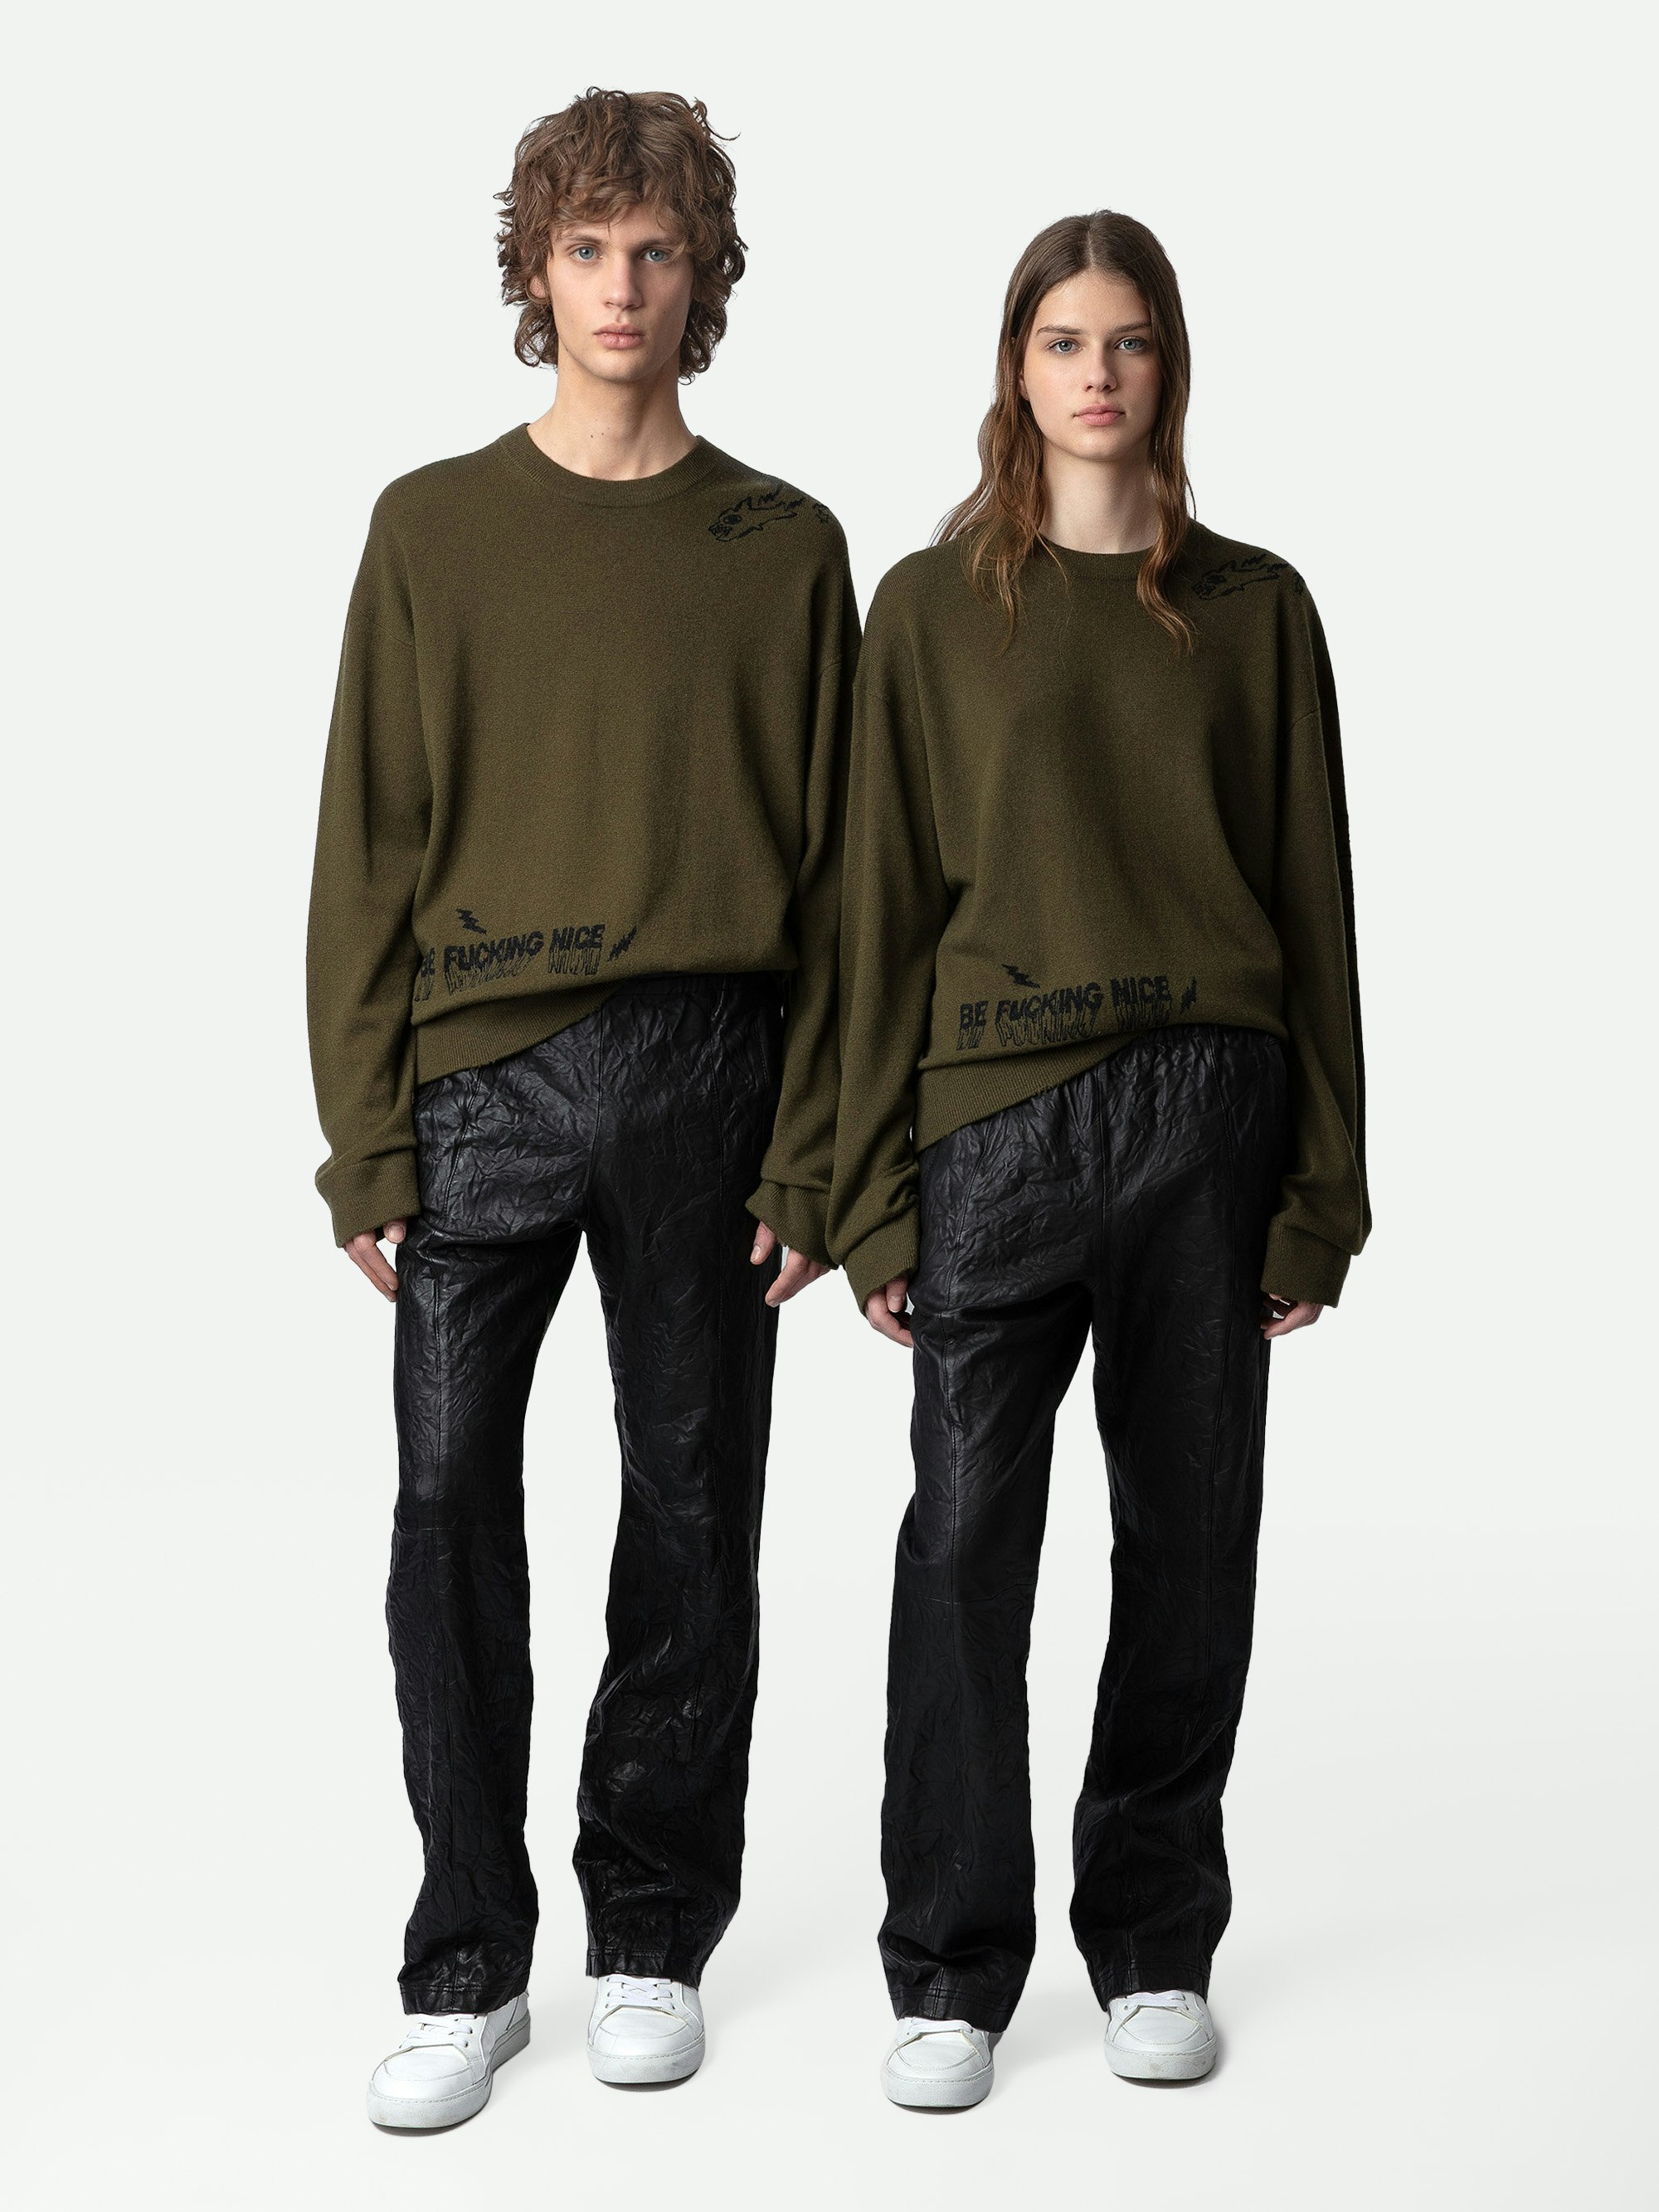 Marko Sweater - Khaki wool and cashmere long-sleeved jumper with graffiti motifs and slogans.